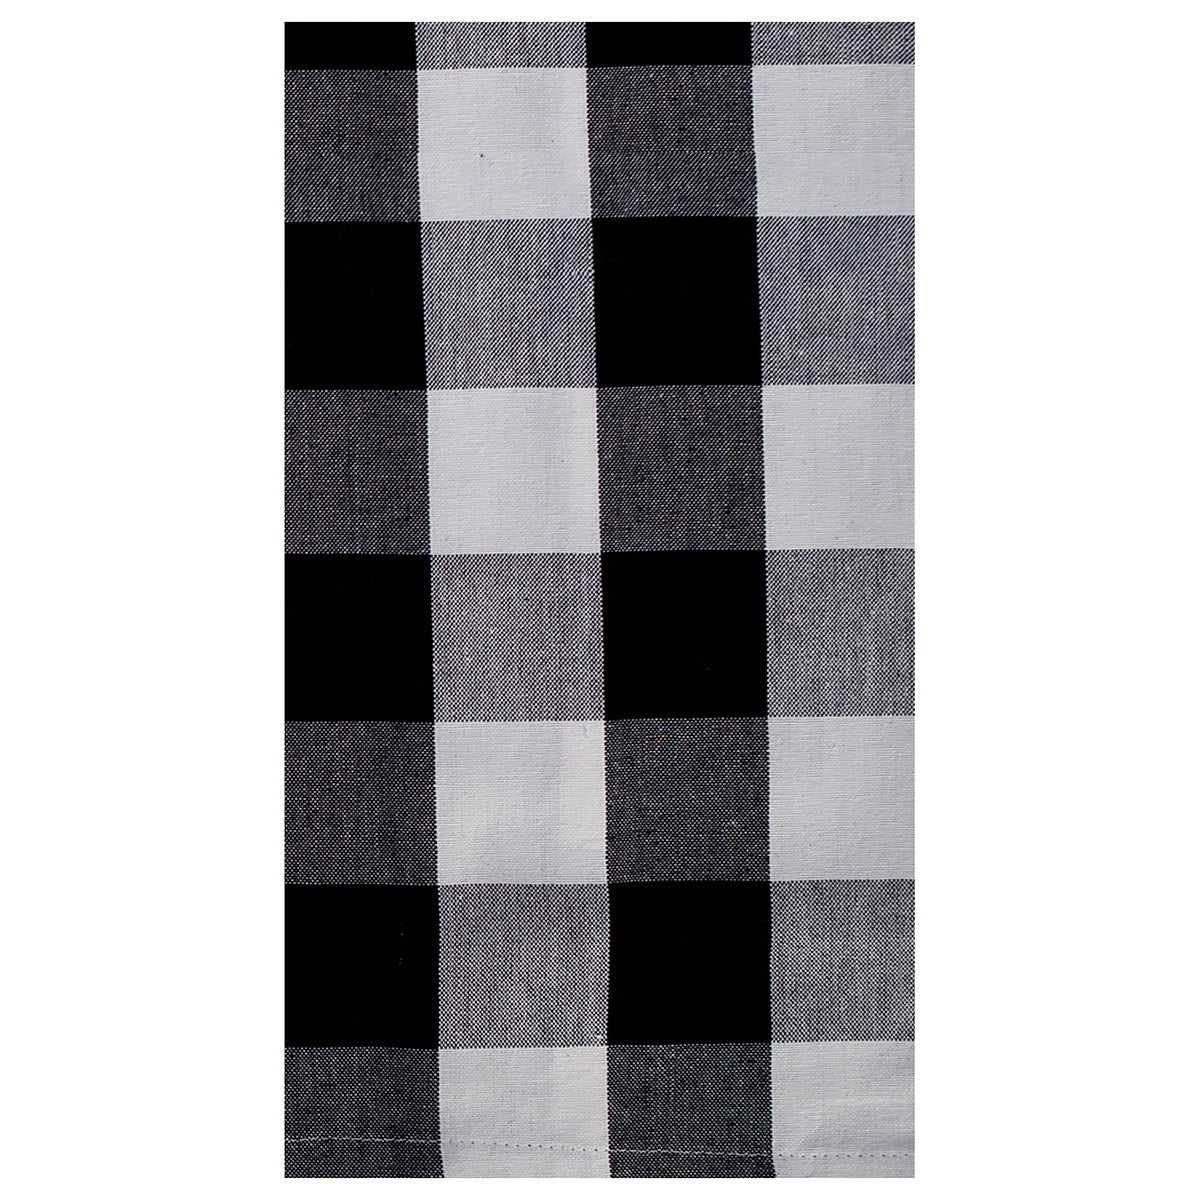 Buffalo Check Guest or Kitchen Towel